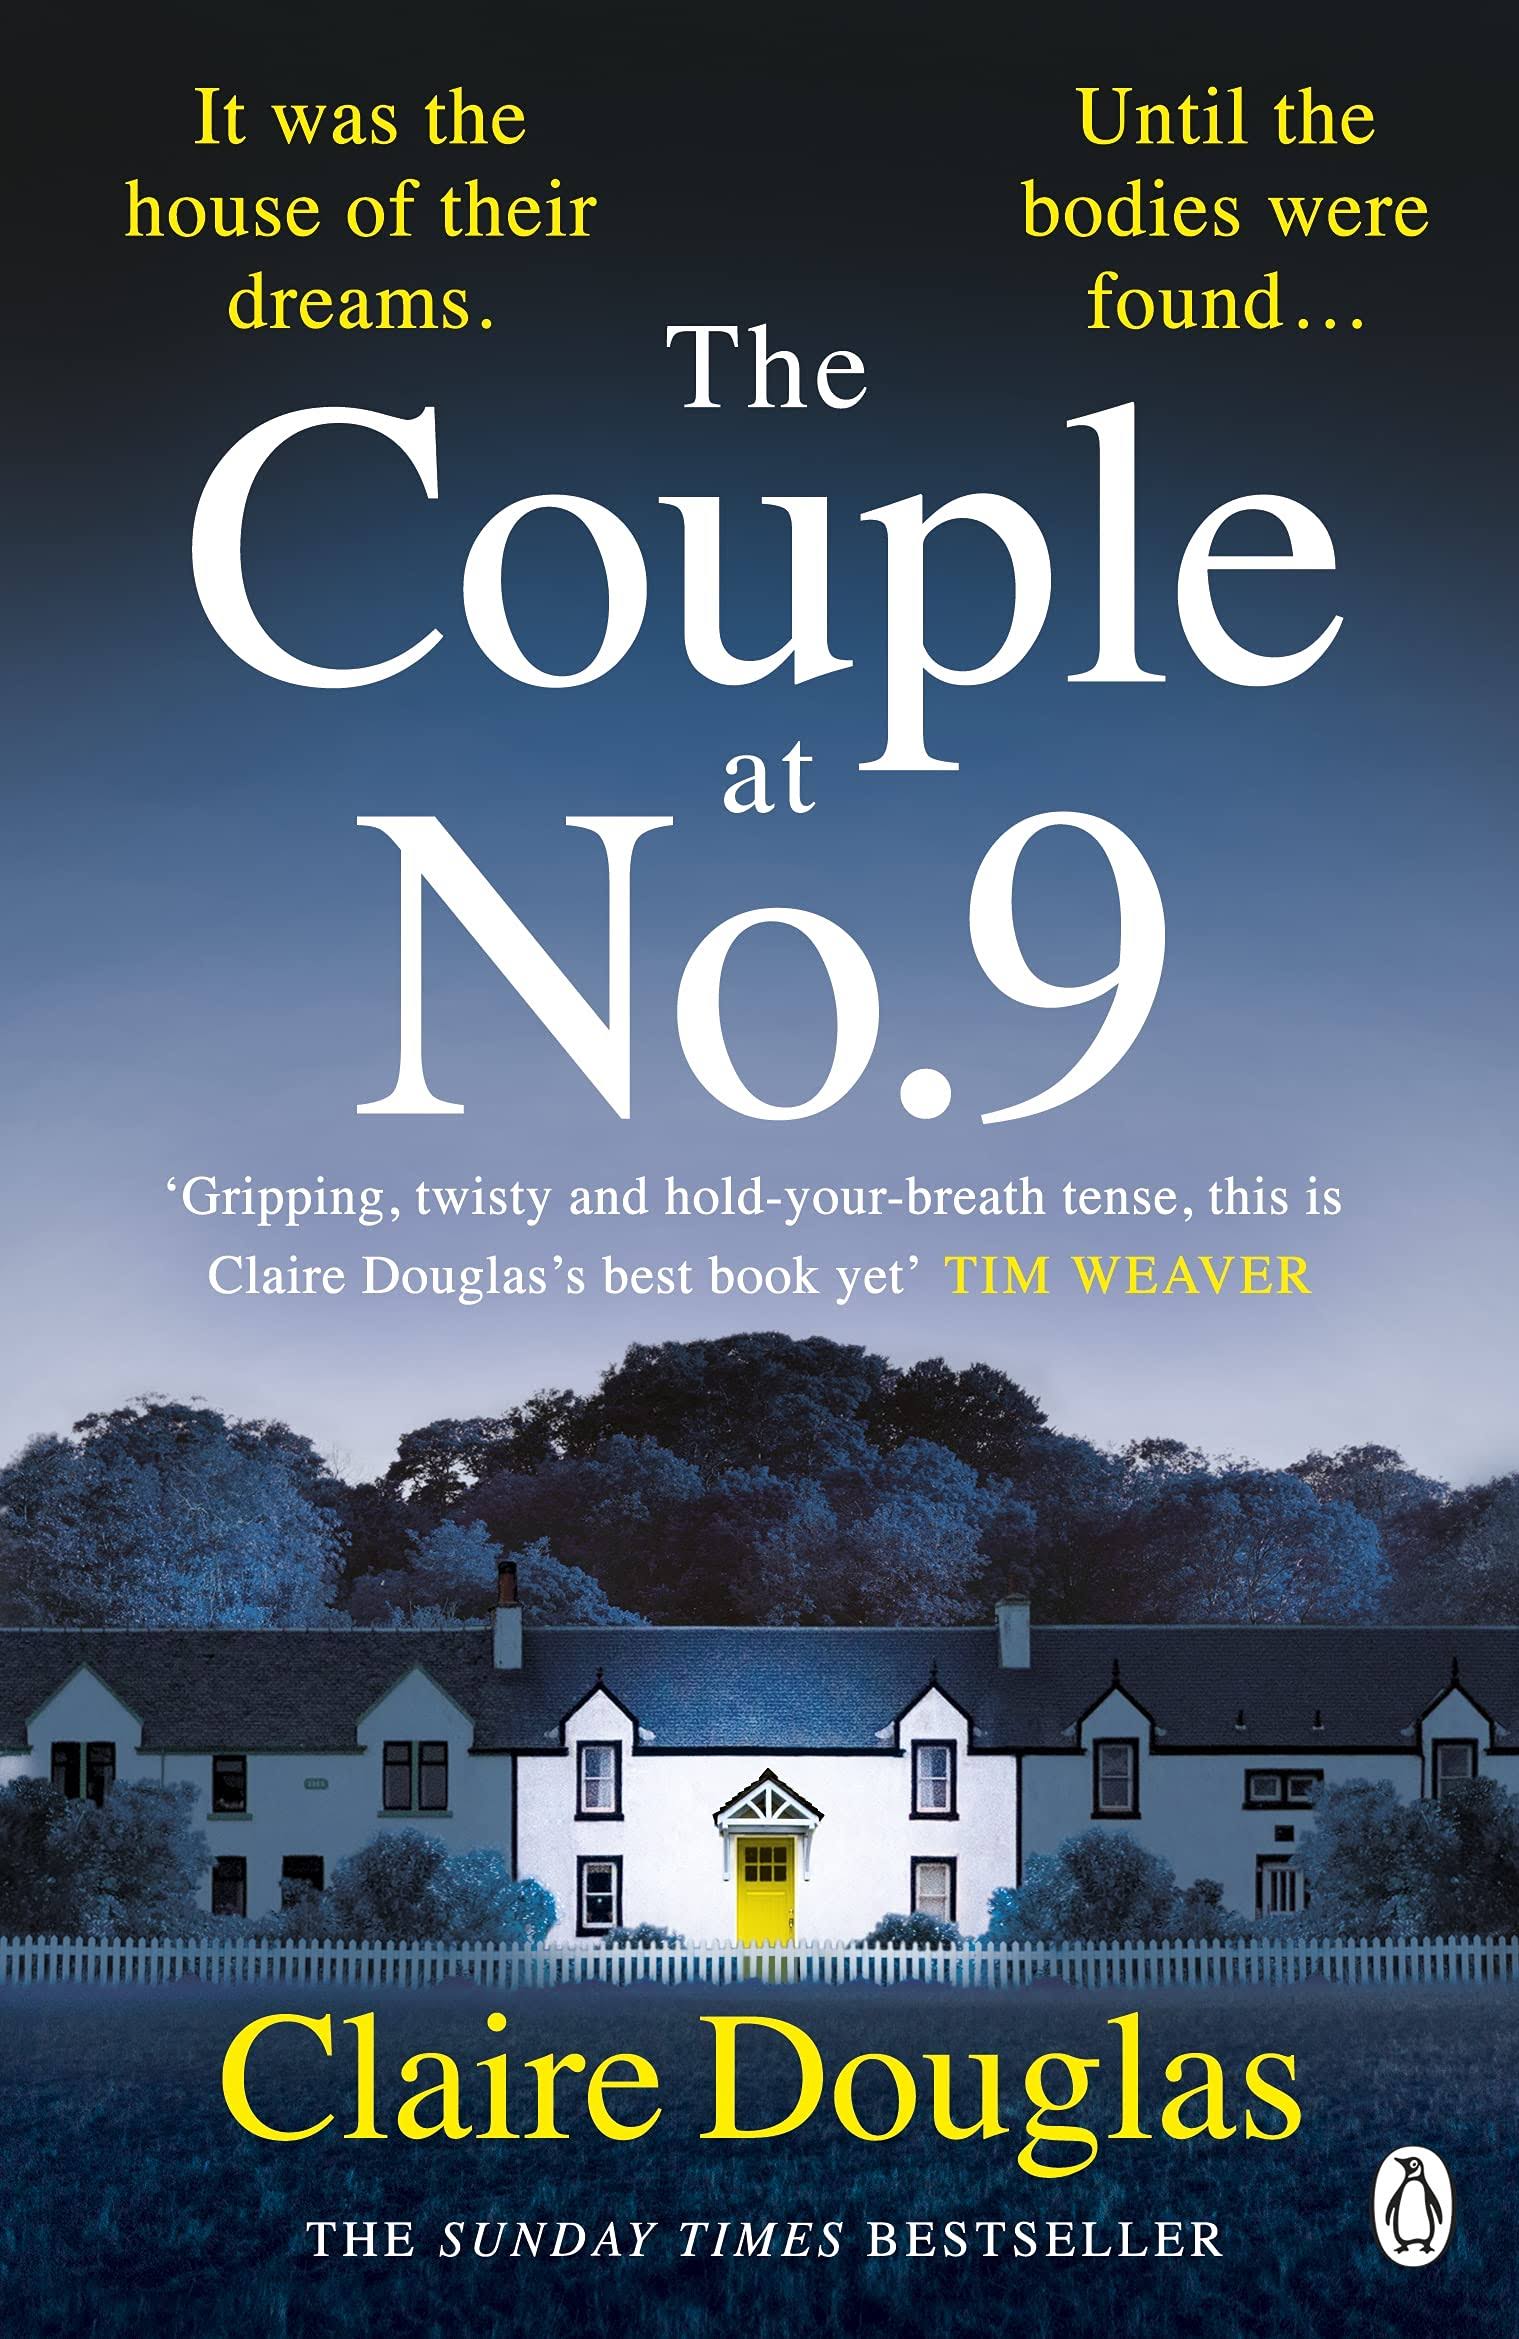 The Couple at No. 9 [Book]